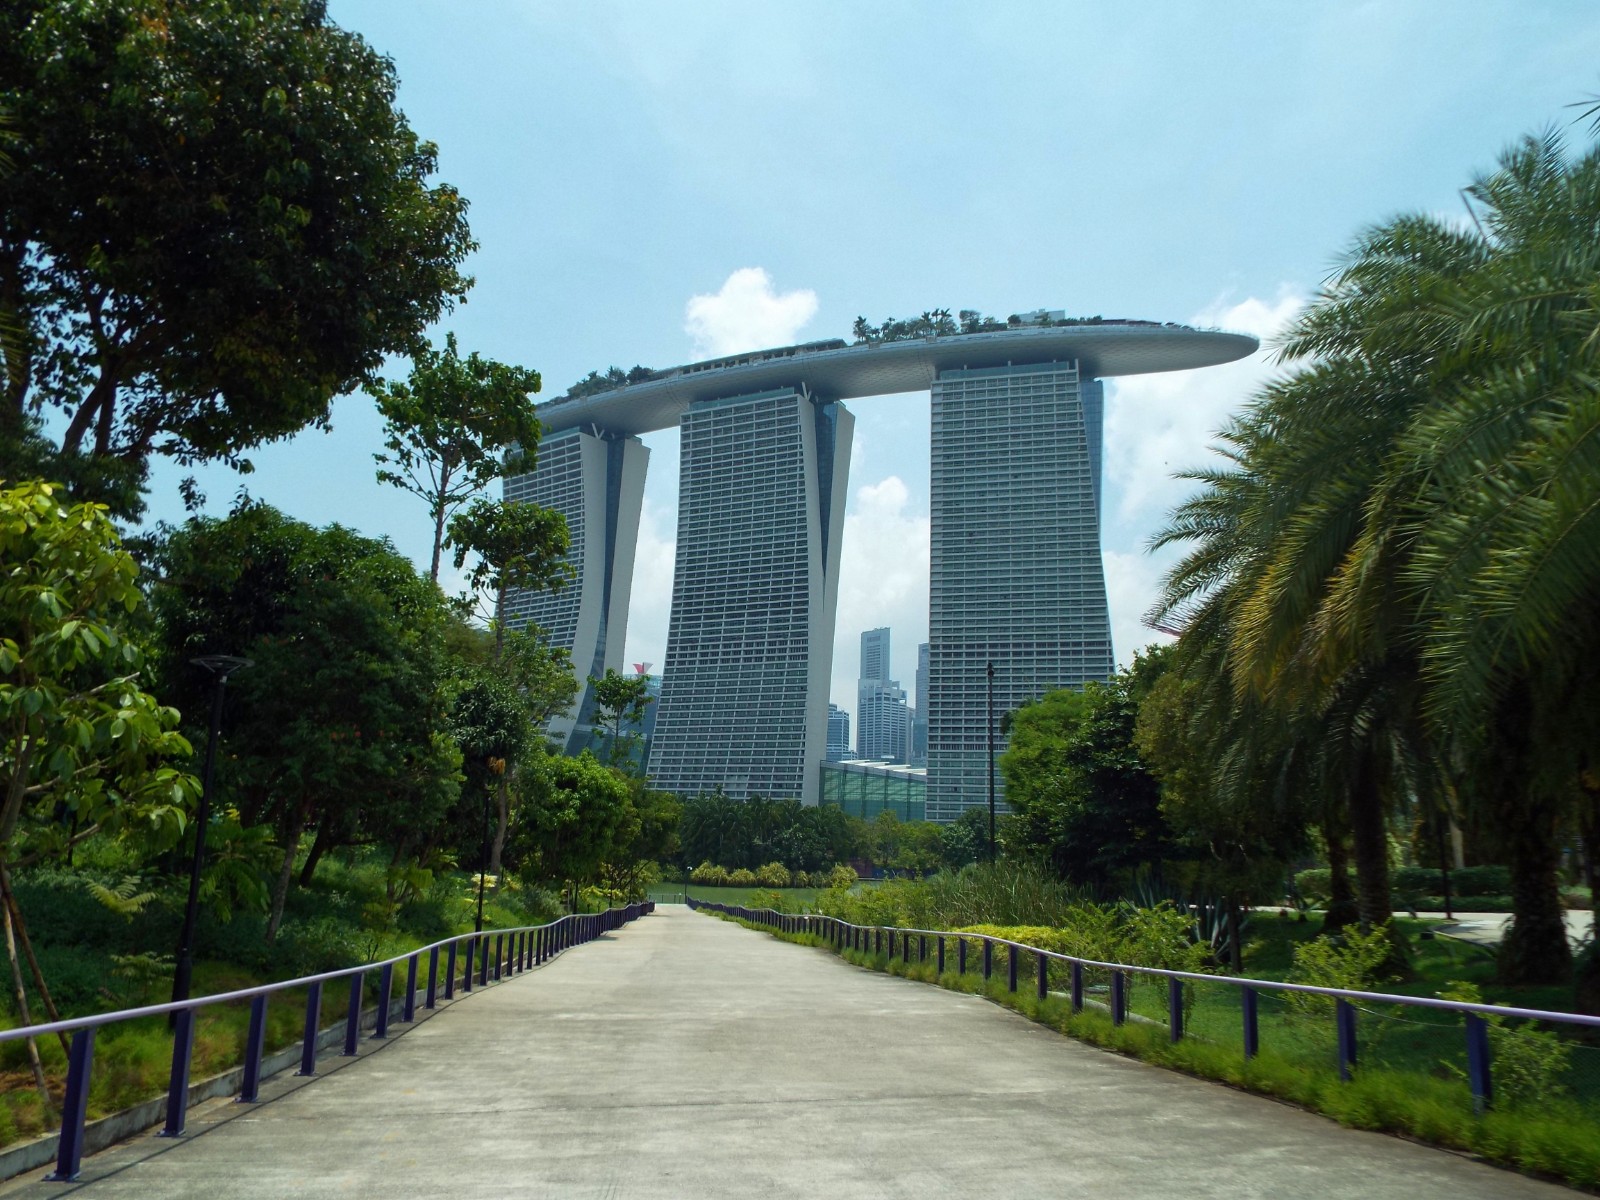 Marine bay sands hotel, Hotel | Singapore | Bay | Marine | Architecture | Building | City | Structure | Glass | Metal | People | Garden | Path | Tree | Green